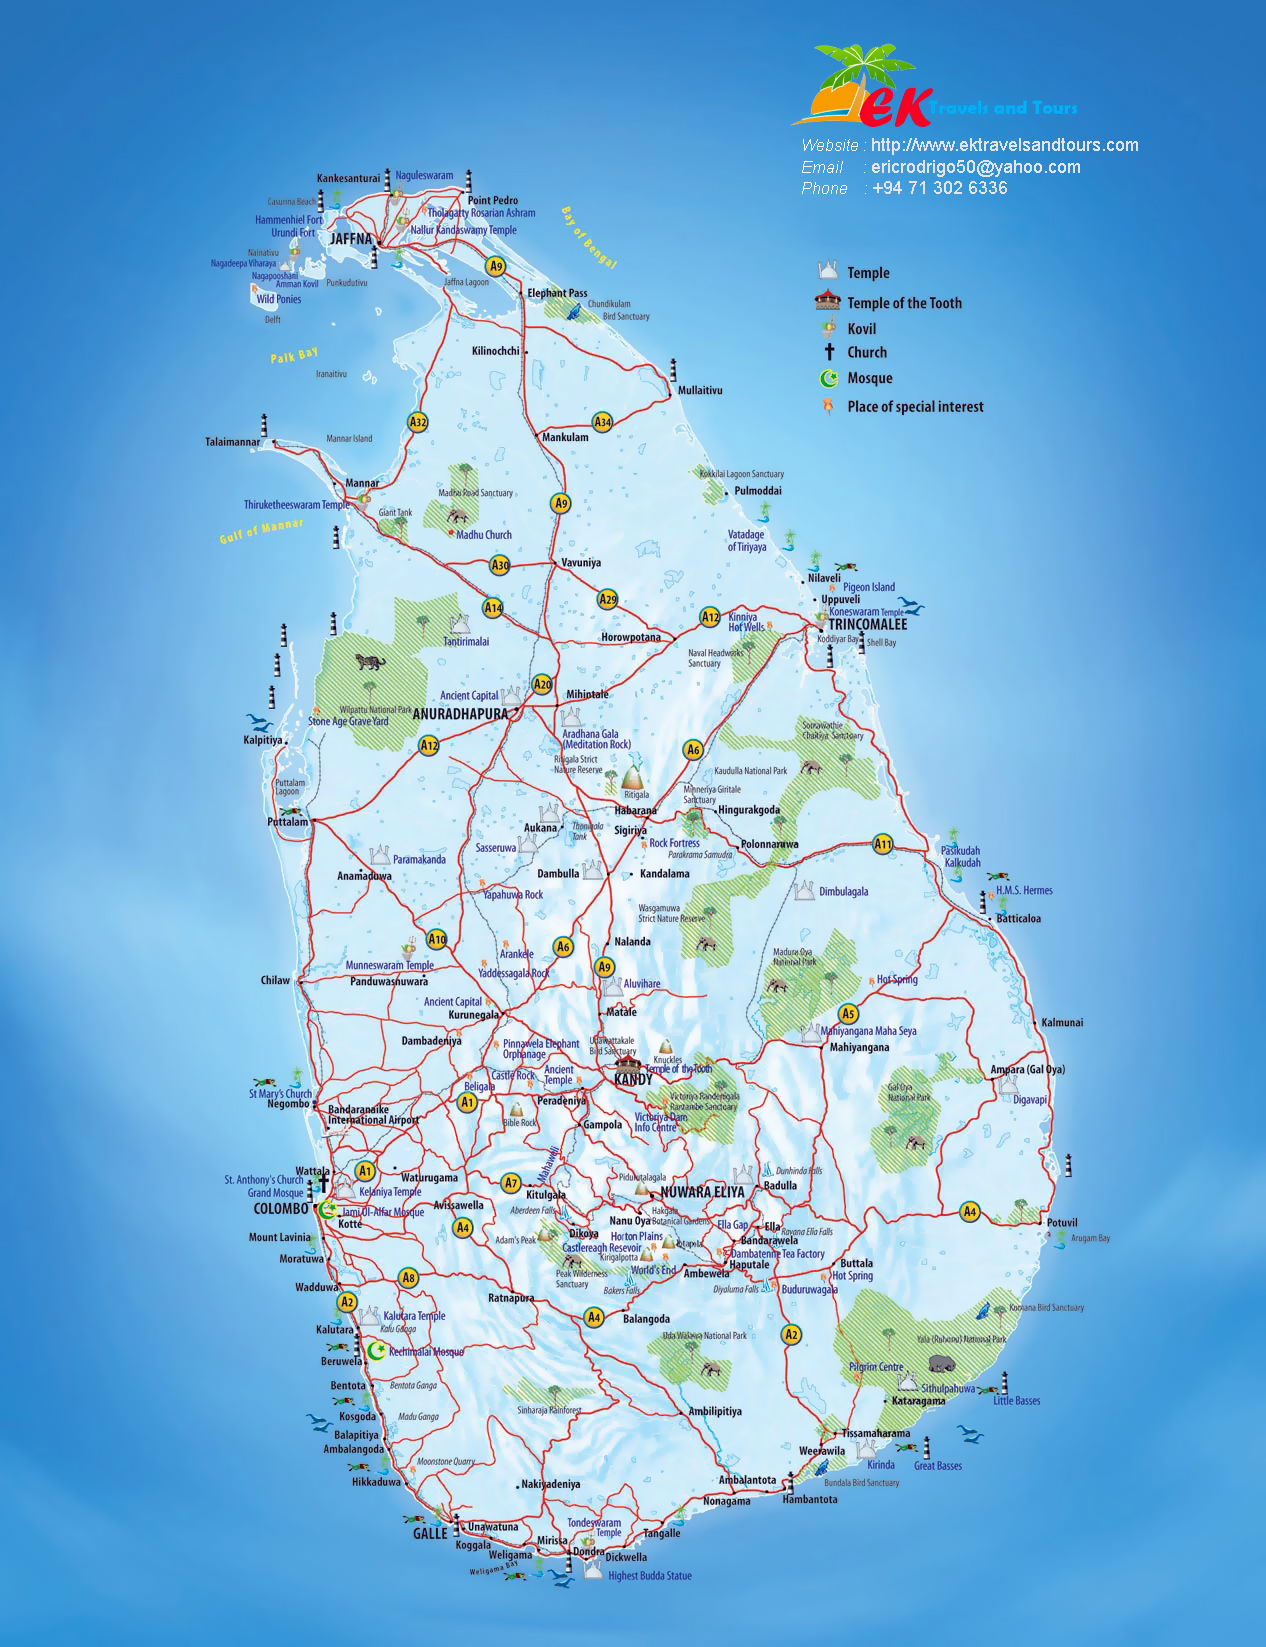 sri lanka map with tourist attractions